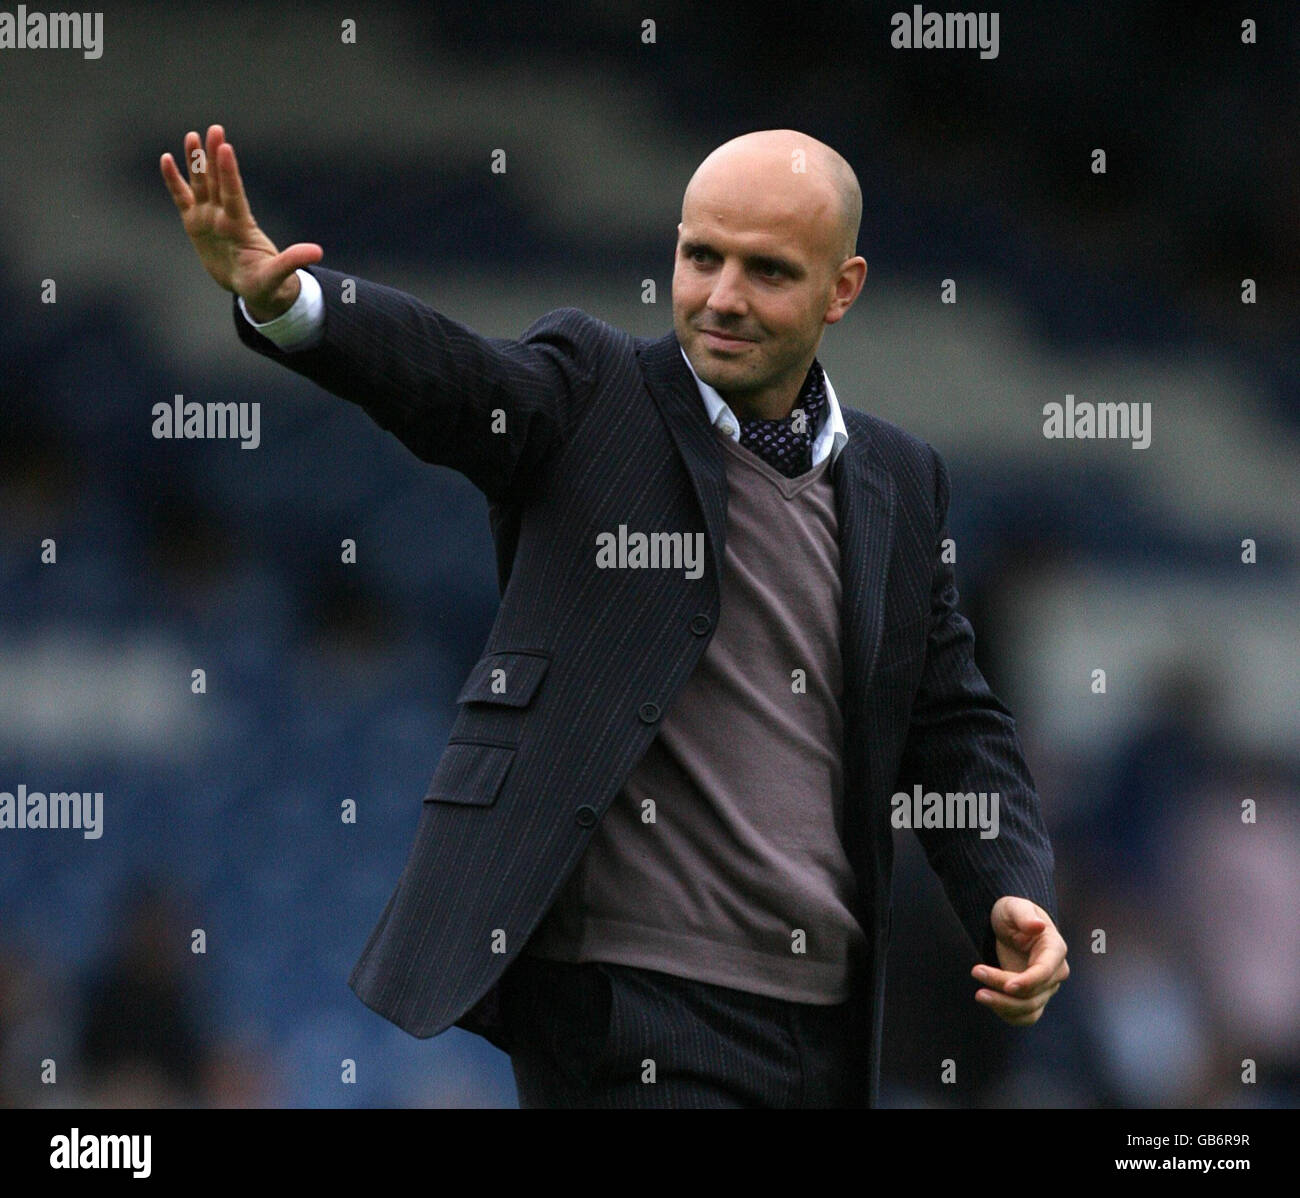 Soccer - Coca-Cola Football League Two - Bury v Exeter City - Gigg Lane. Exeter City's manager Paul Tisdale celebrates at the end of the game against Bury during the League Two match at Gigg Lane, Bury. Stock Photo